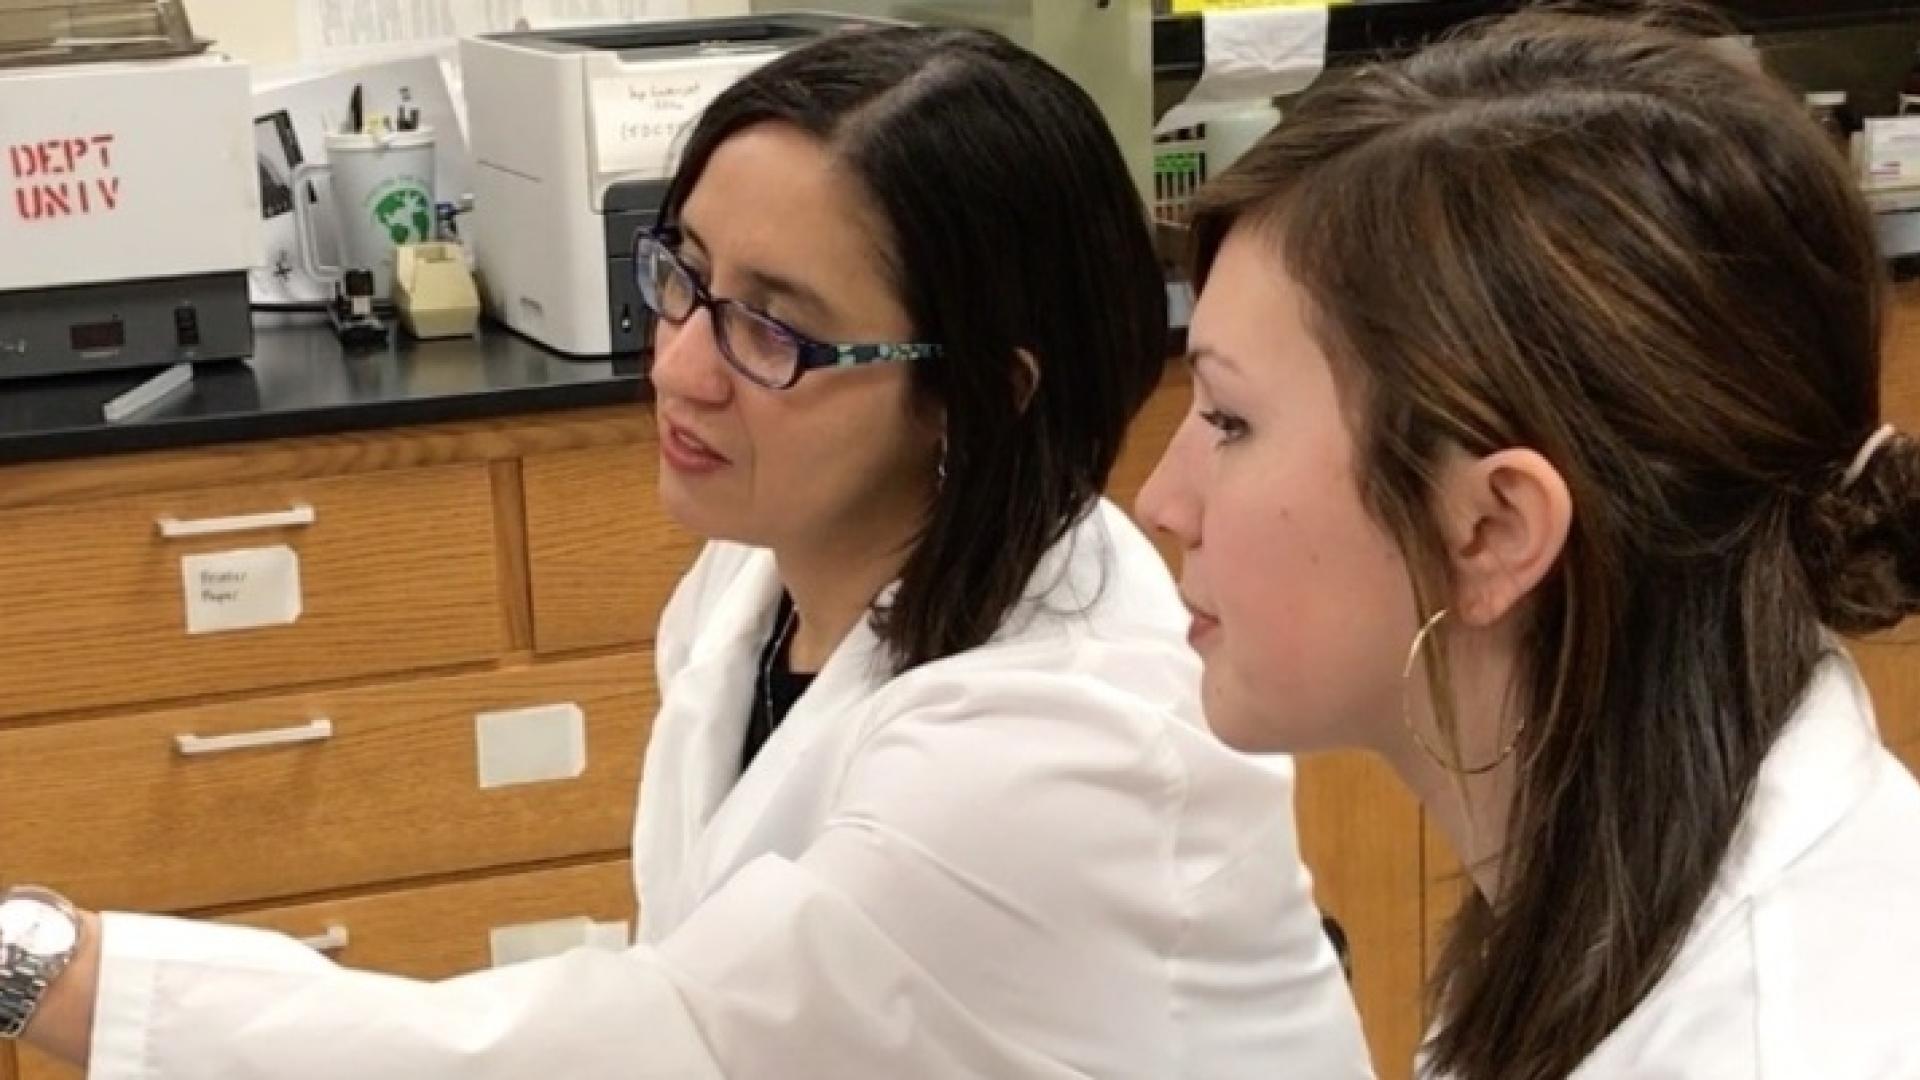 Two Hamline biology students in white coats looking at an image on a computer together